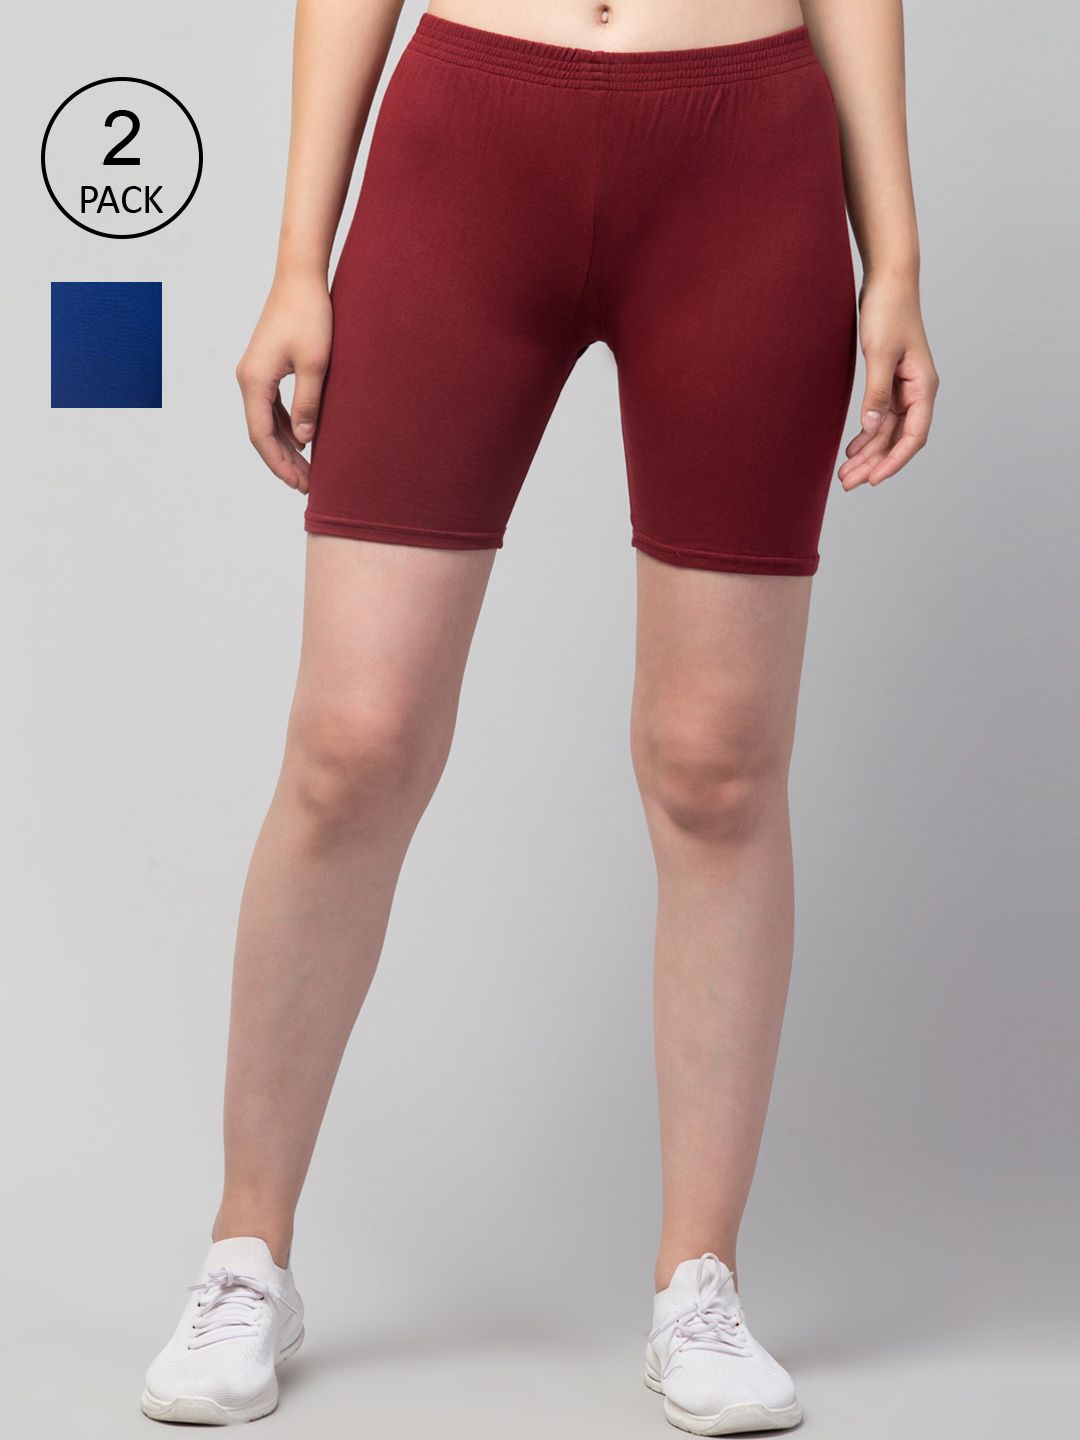 Apraa & Parma Women Set Of 2 Maroon & Blue Slim Fit Pure Cotton Cycling Sports Shorts Price in India